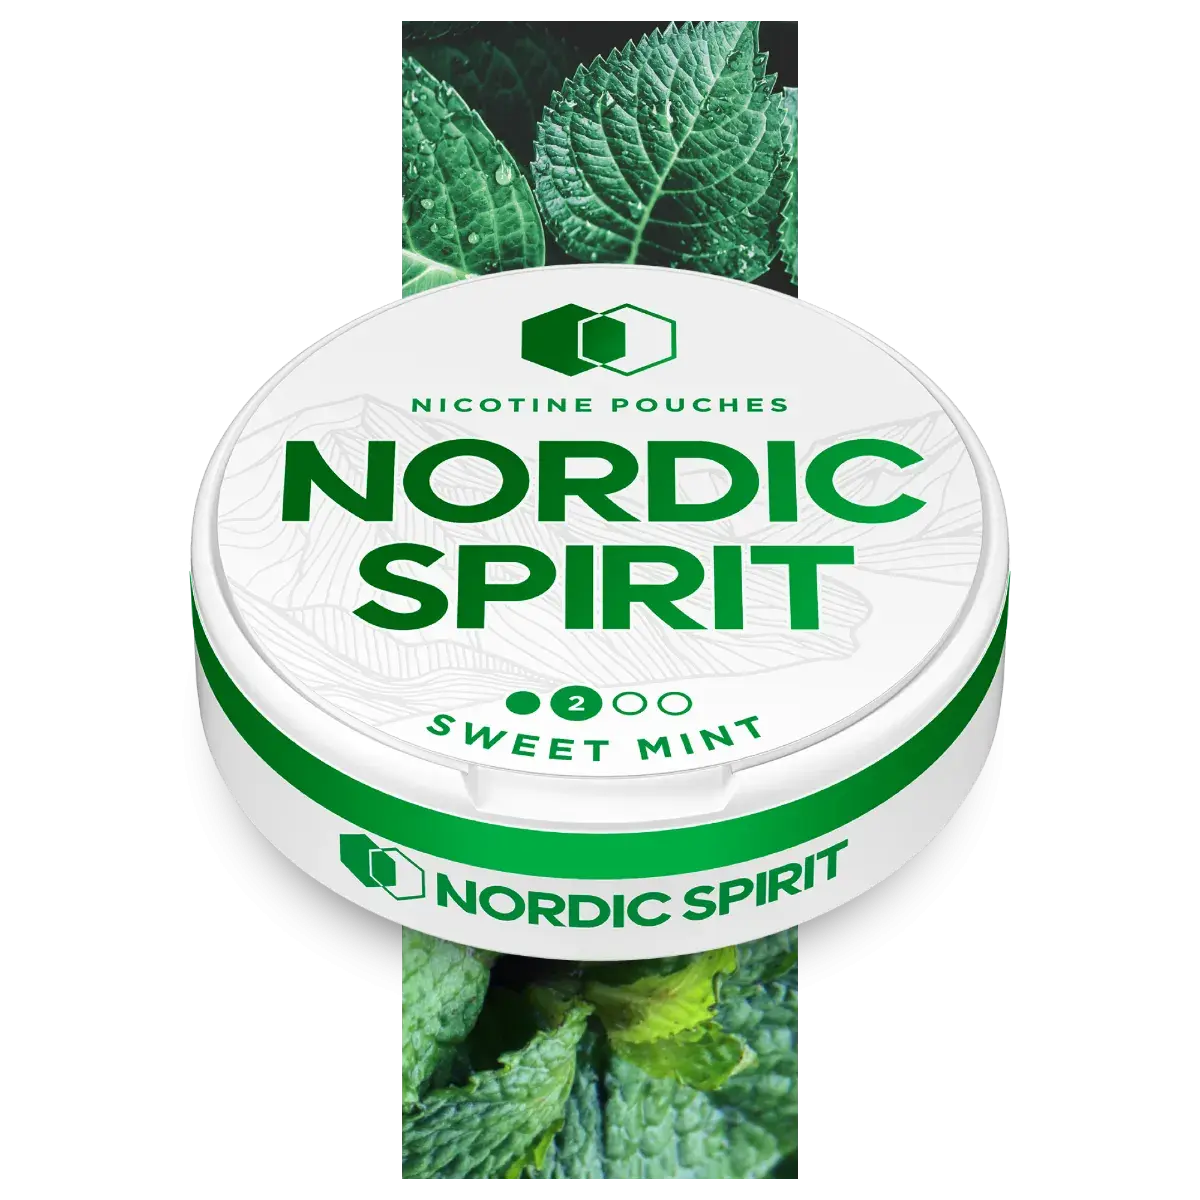 Can of Nordic Spirit Sweet Mint Nicotine pouches in a regular strength.